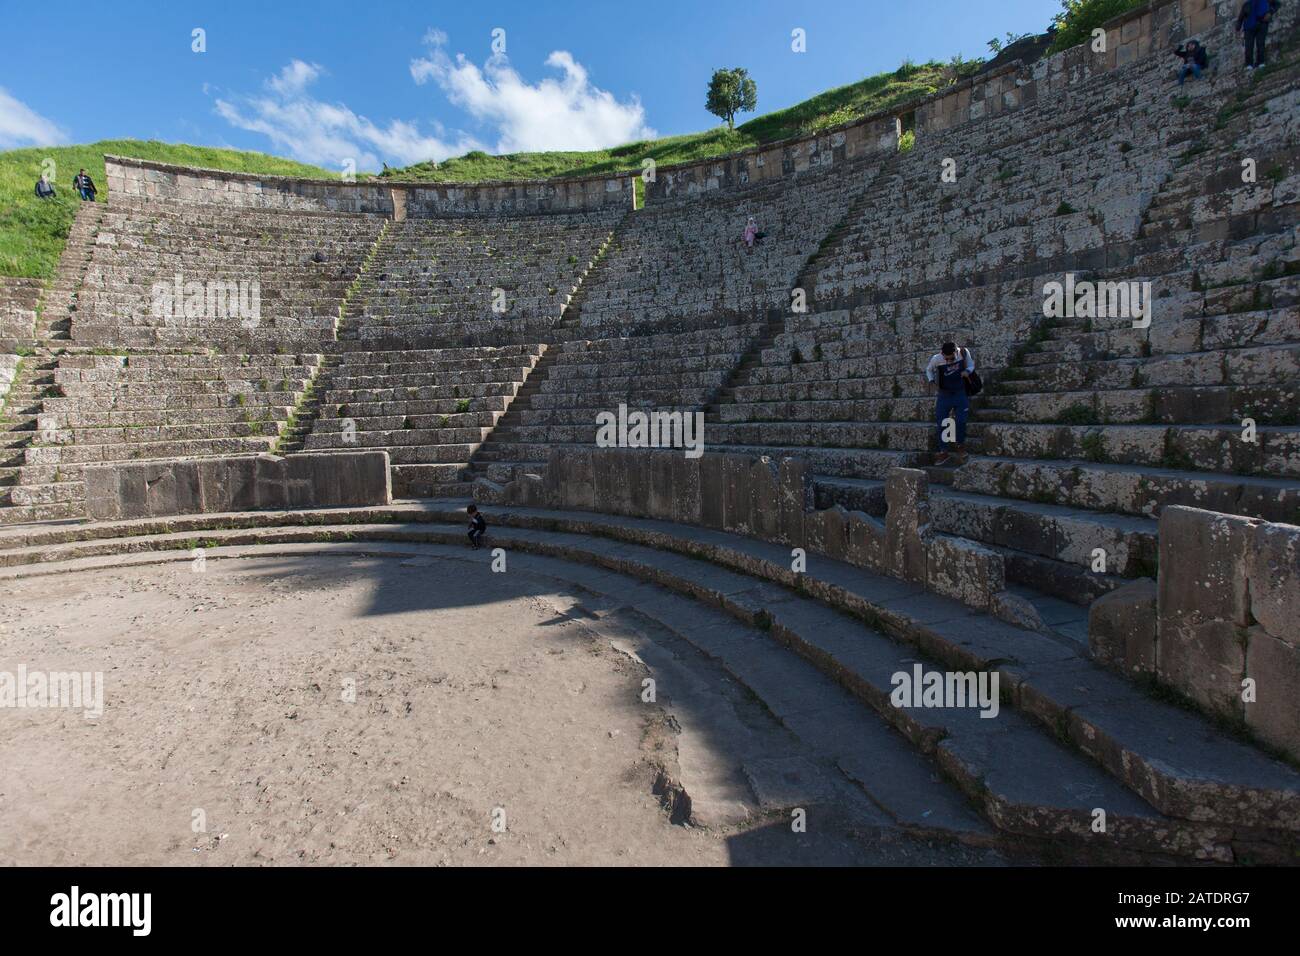 The amphitheatre at the Ancient Roman ruins of Djemilla, A UNESCO World Heritage site in Northern Algeria. Close to Setif.. Stock Photo